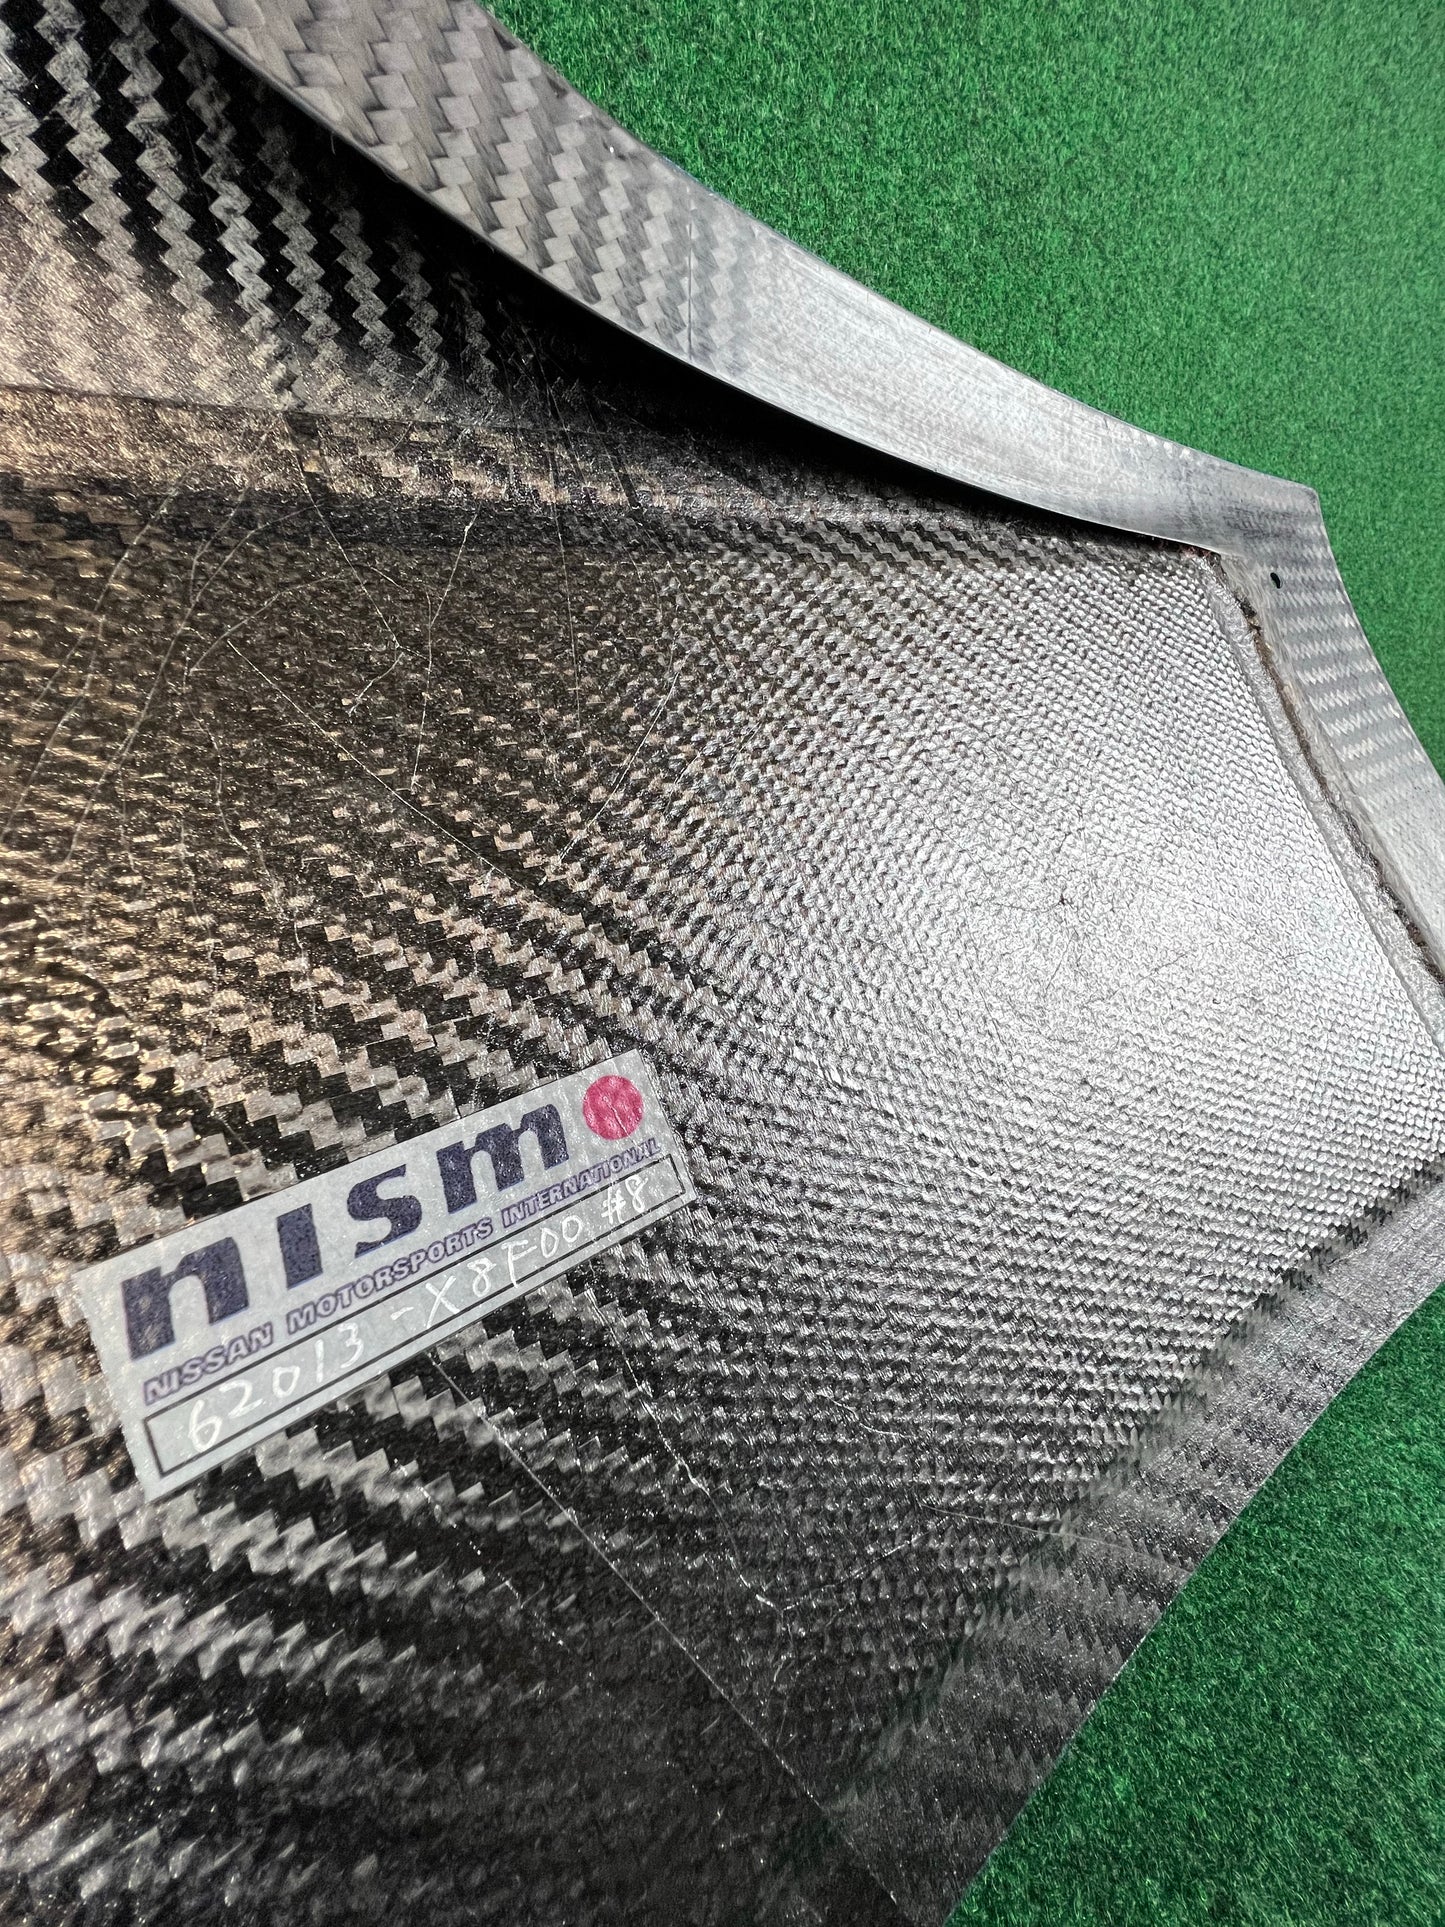 *Free Shipping (in USA) - Calsonic NISMO Impul 2008 Nissan R35 Super GT Carbon Fiber Front Left Fender/Bumper Aero Section